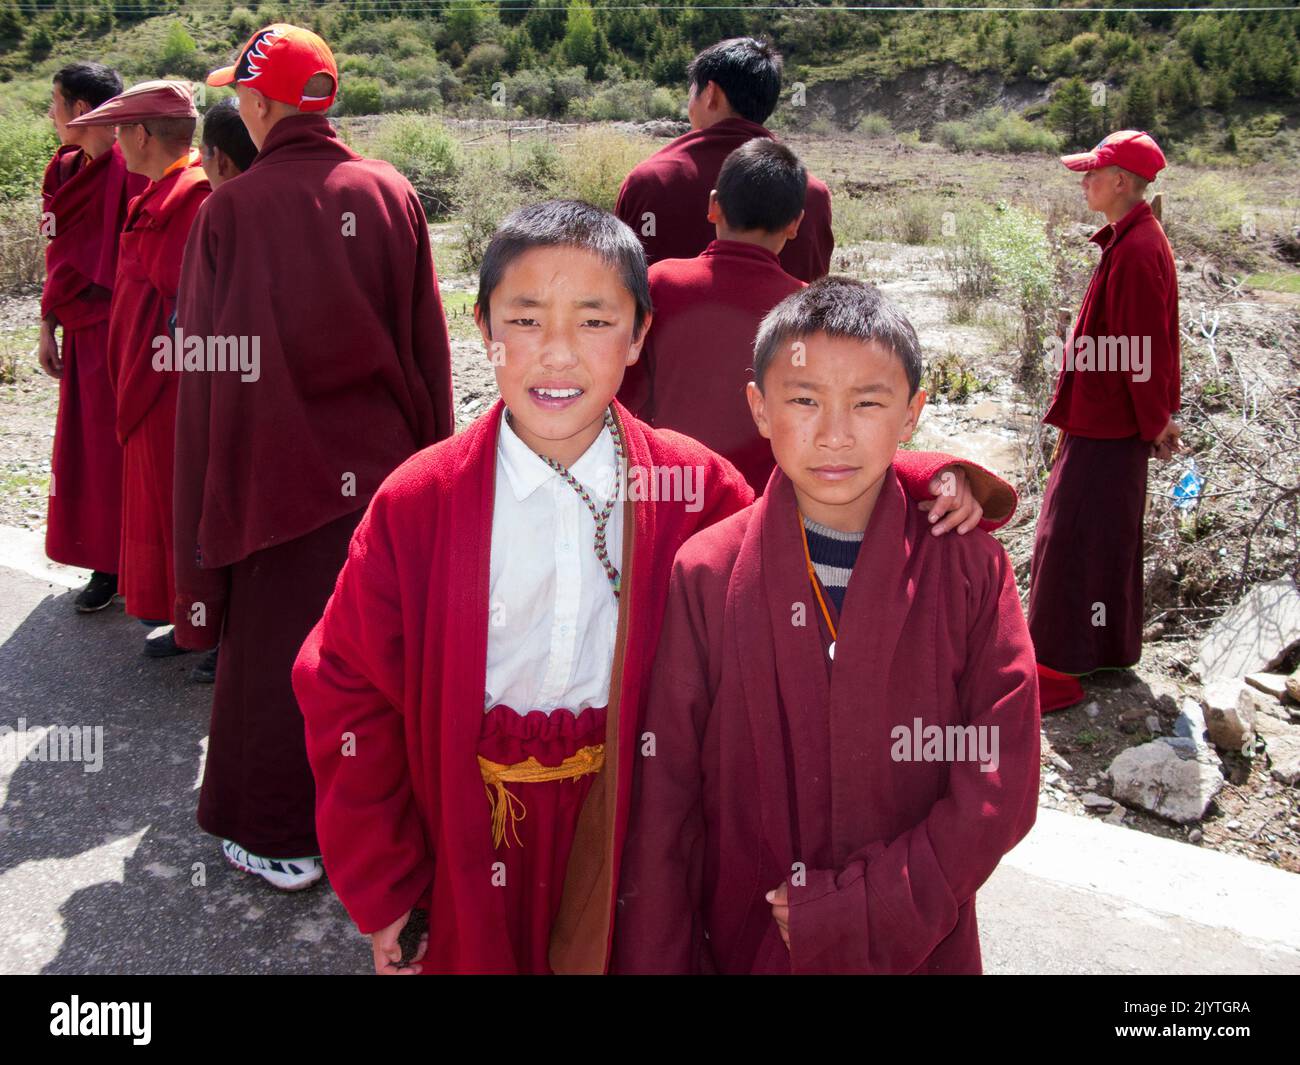 Boys boy monk / novice monks in a small Tibetan village outside Songpan ancient town in northern Sichuan (Chinese) province, China. PRC. Administered by Ngawa Tibetan and Qiang Autonomous Prefecture. (126) Stock Photo